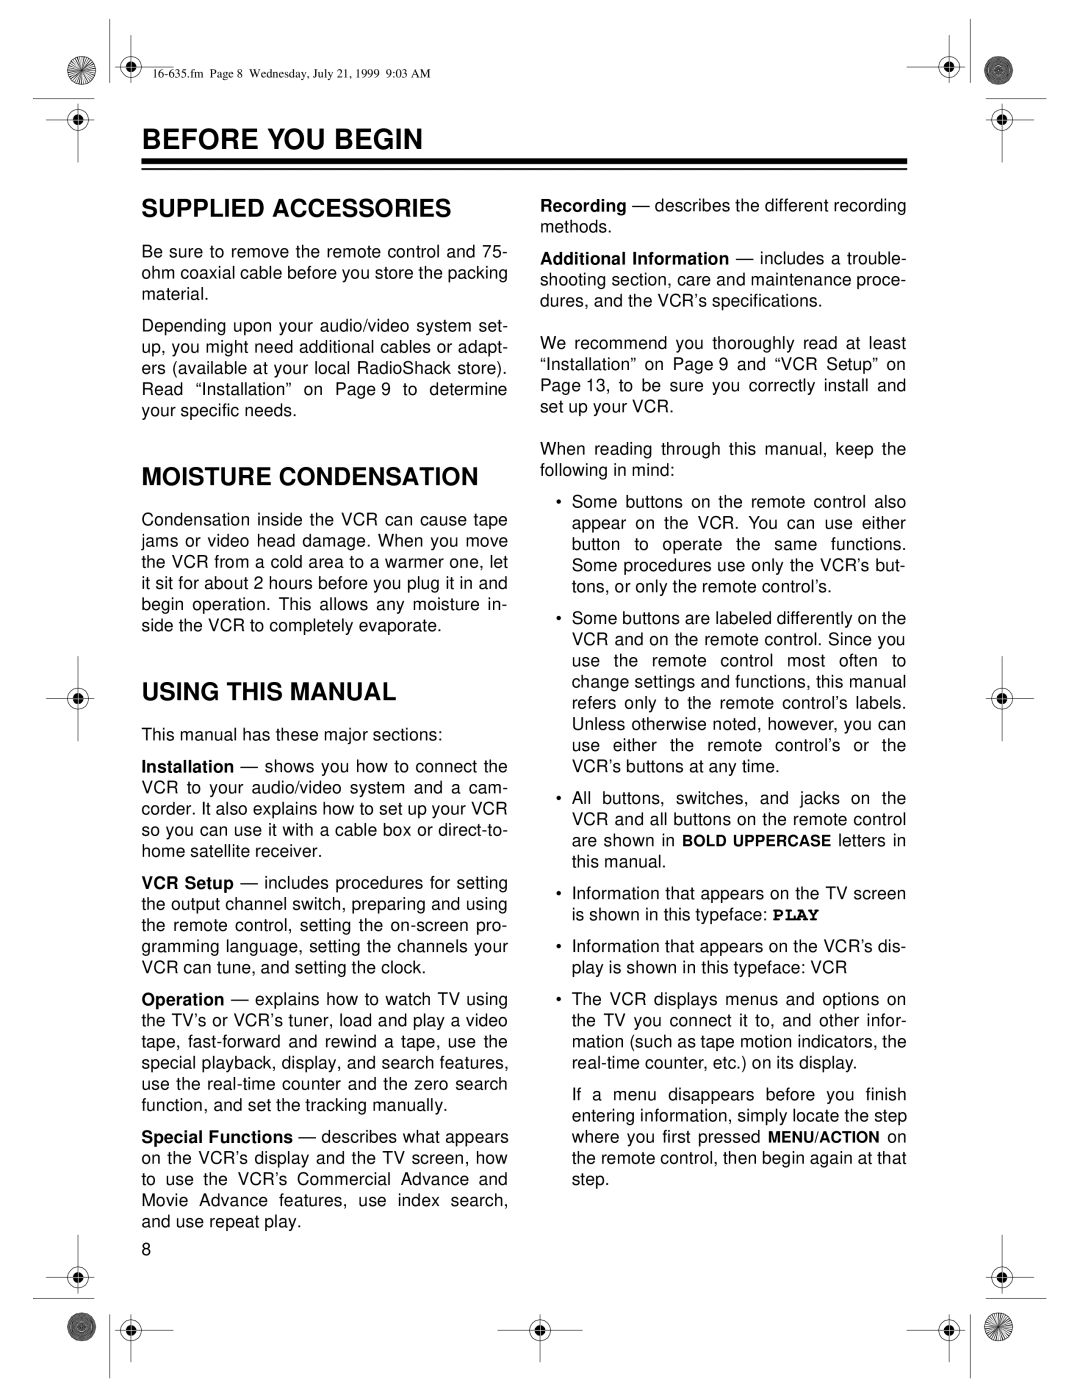 Radio Shack 66 owner manual Before You Begin, Supplied Accessories, Moisture Condensation, Using This Manual 